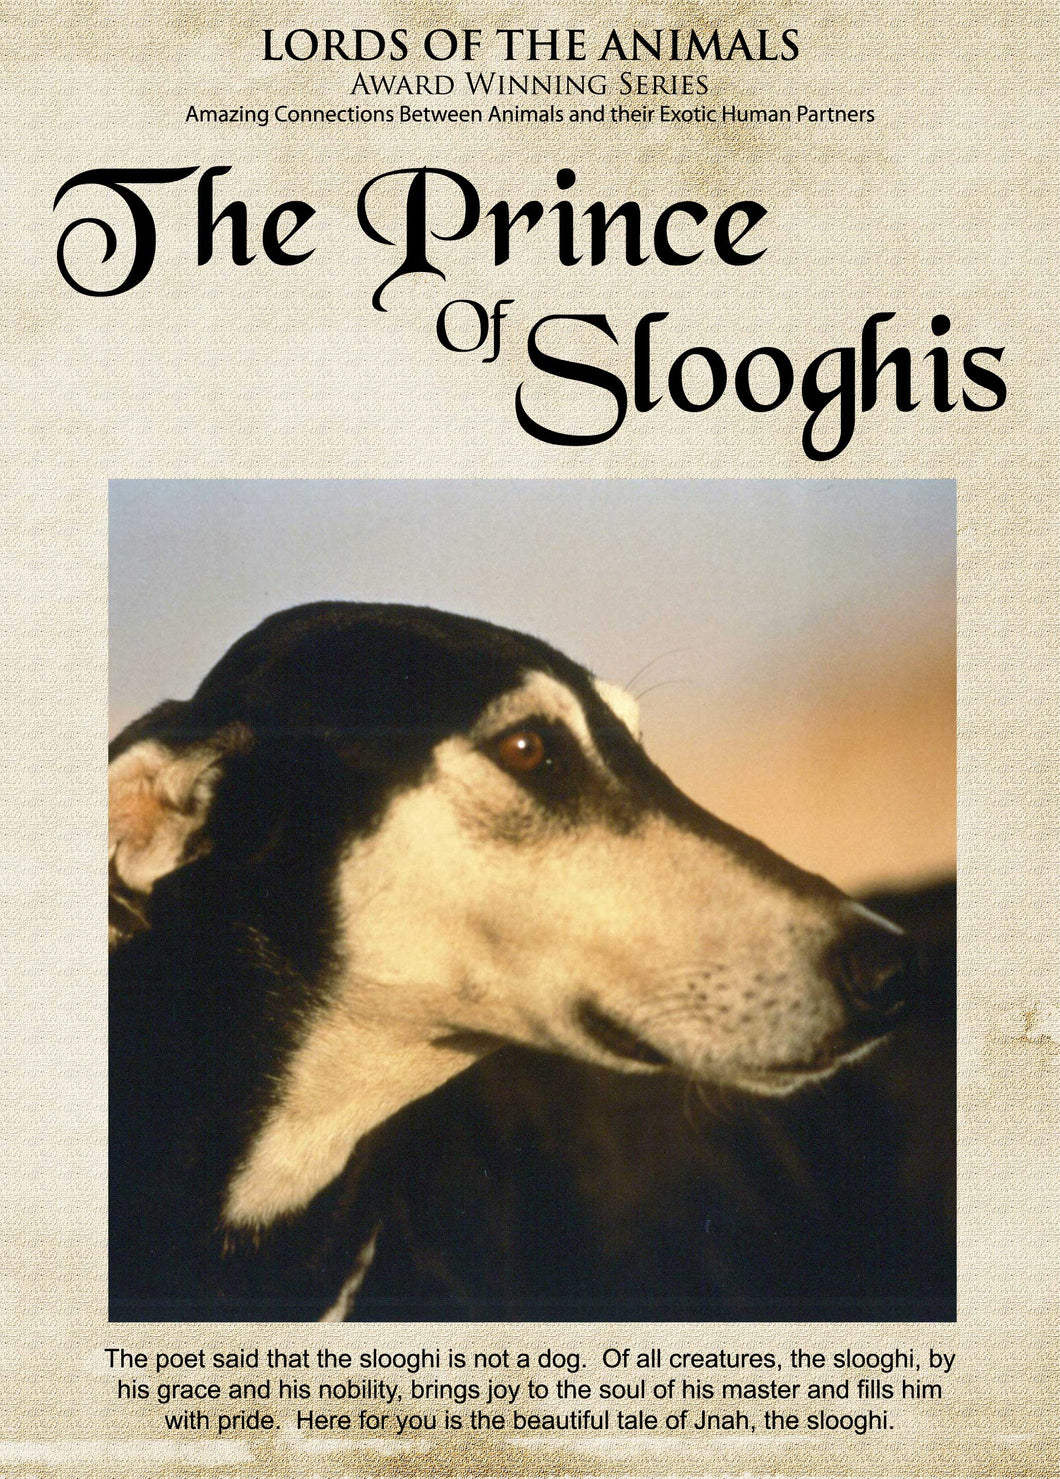 Lords of the Animals: Prince of Slooghis